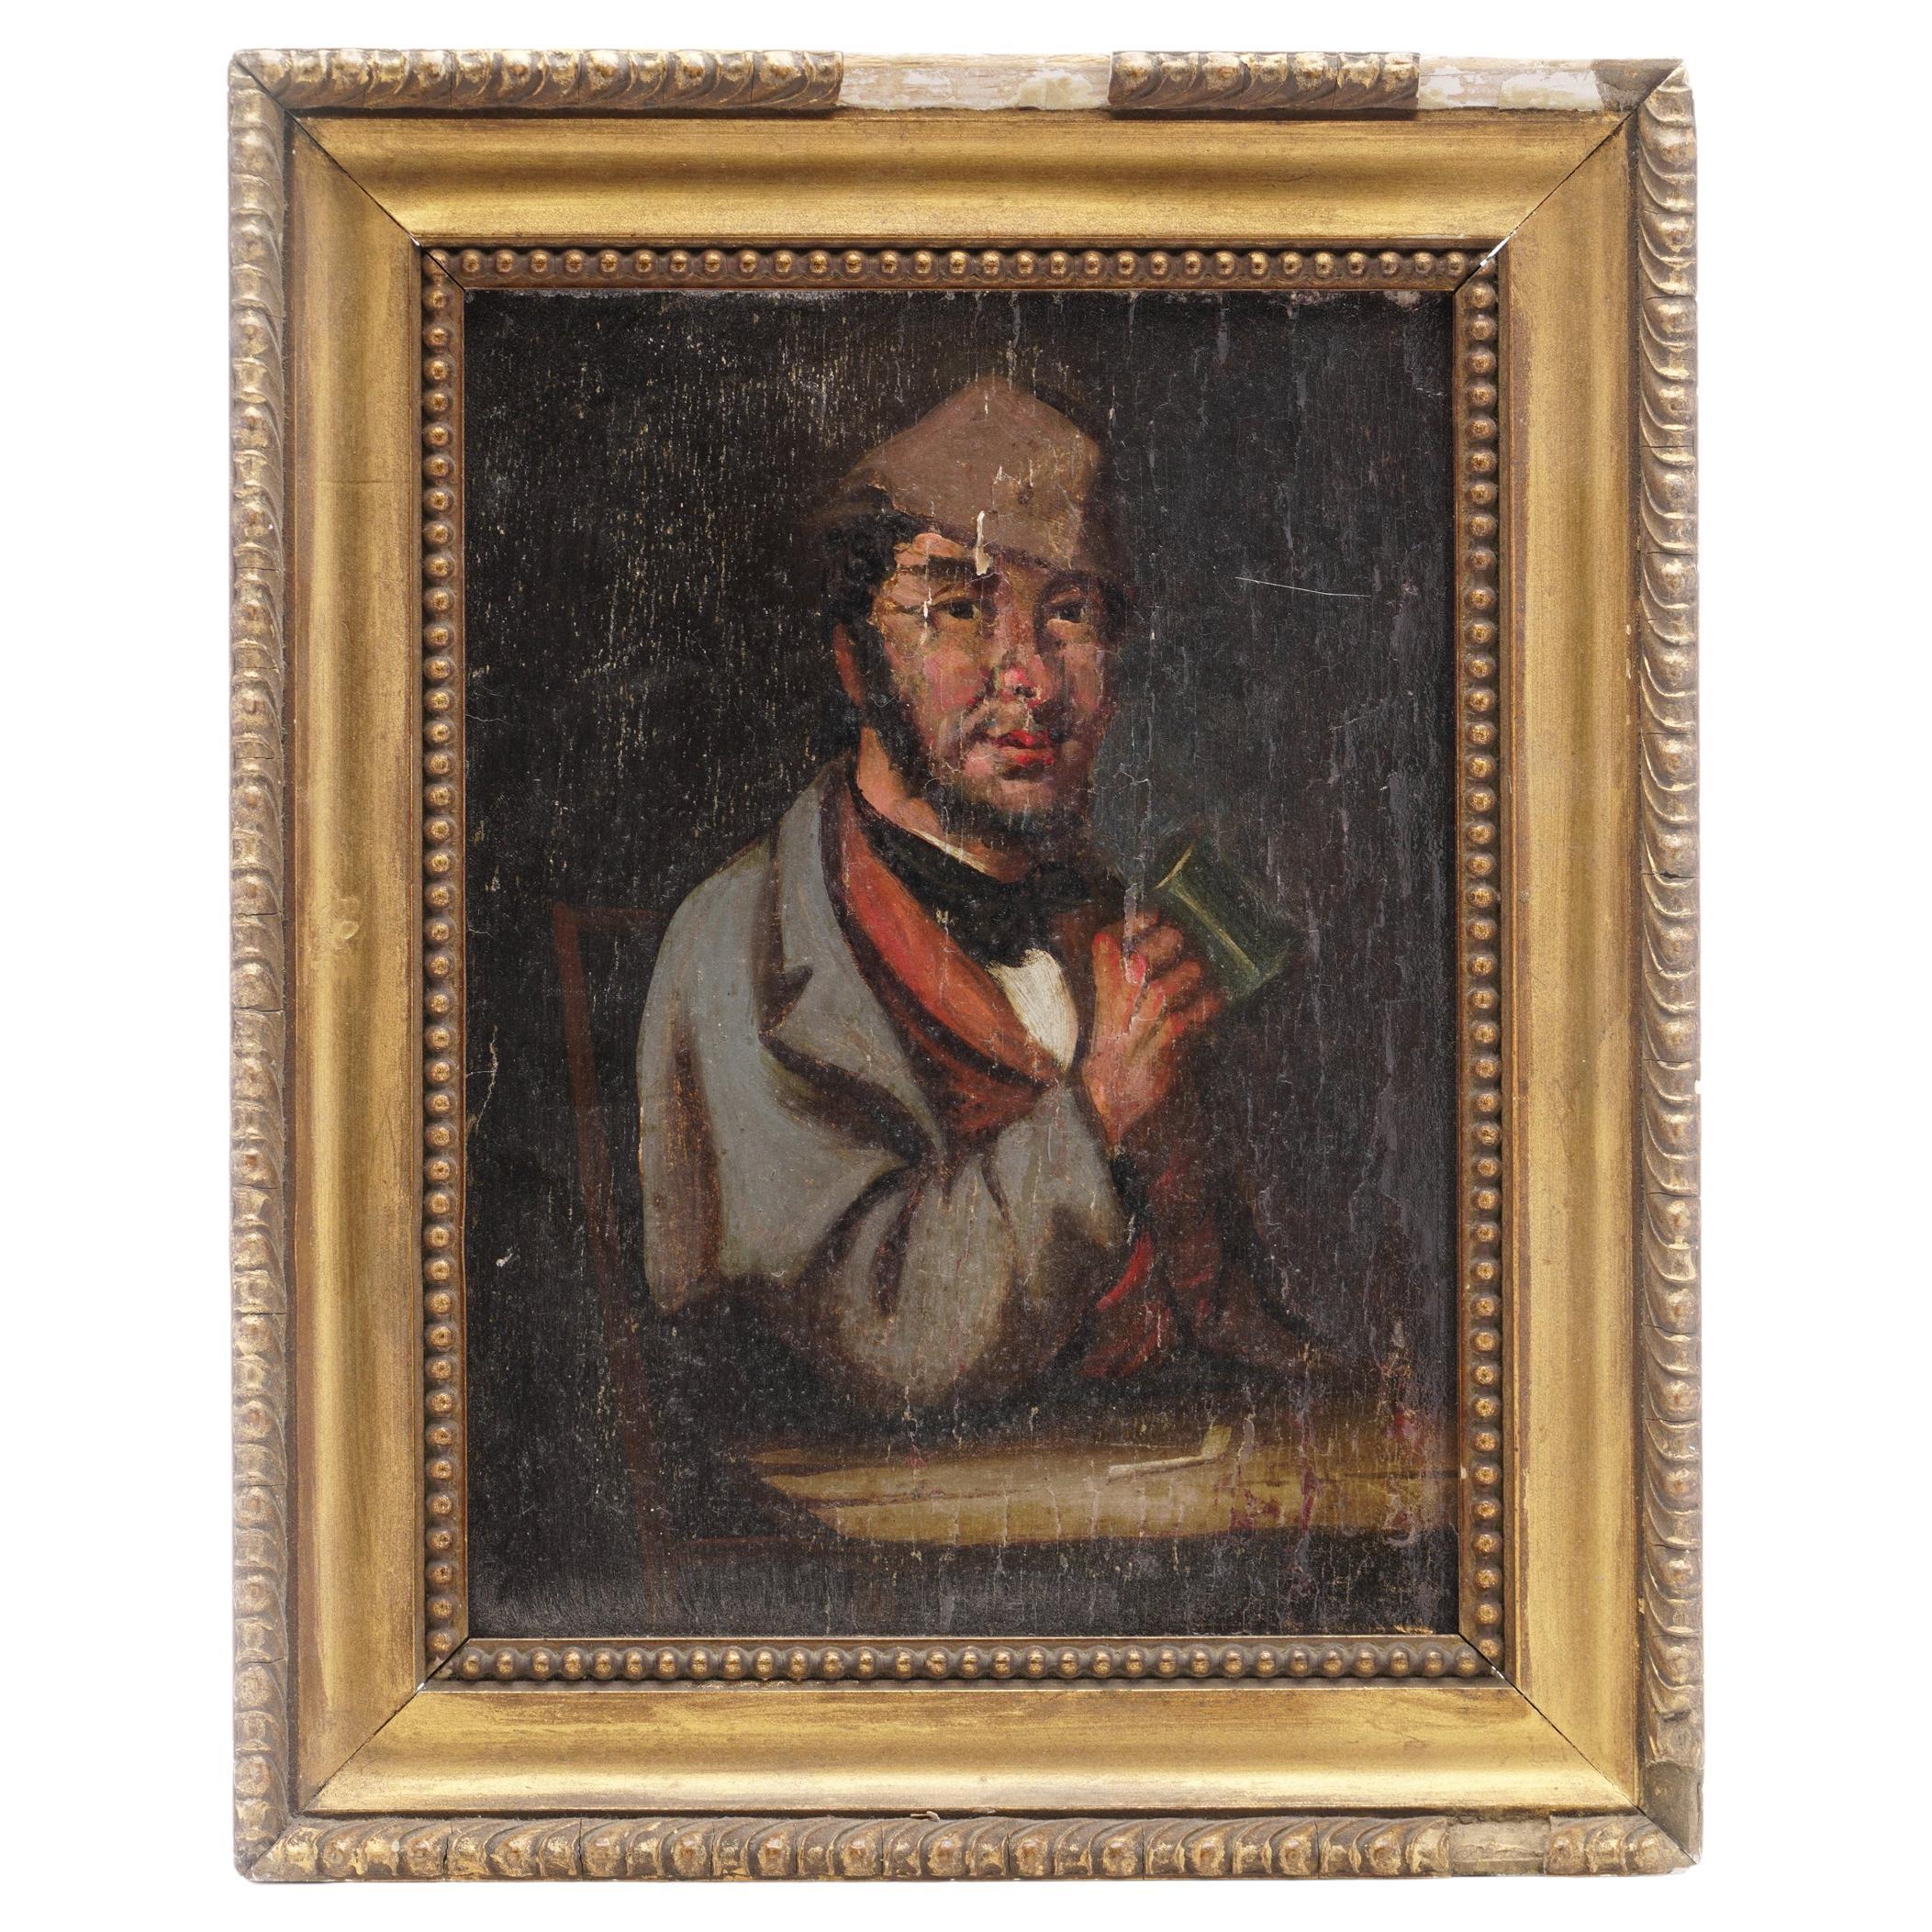 19th-century oil on wood panel painting featuring a man drinking in a tavern